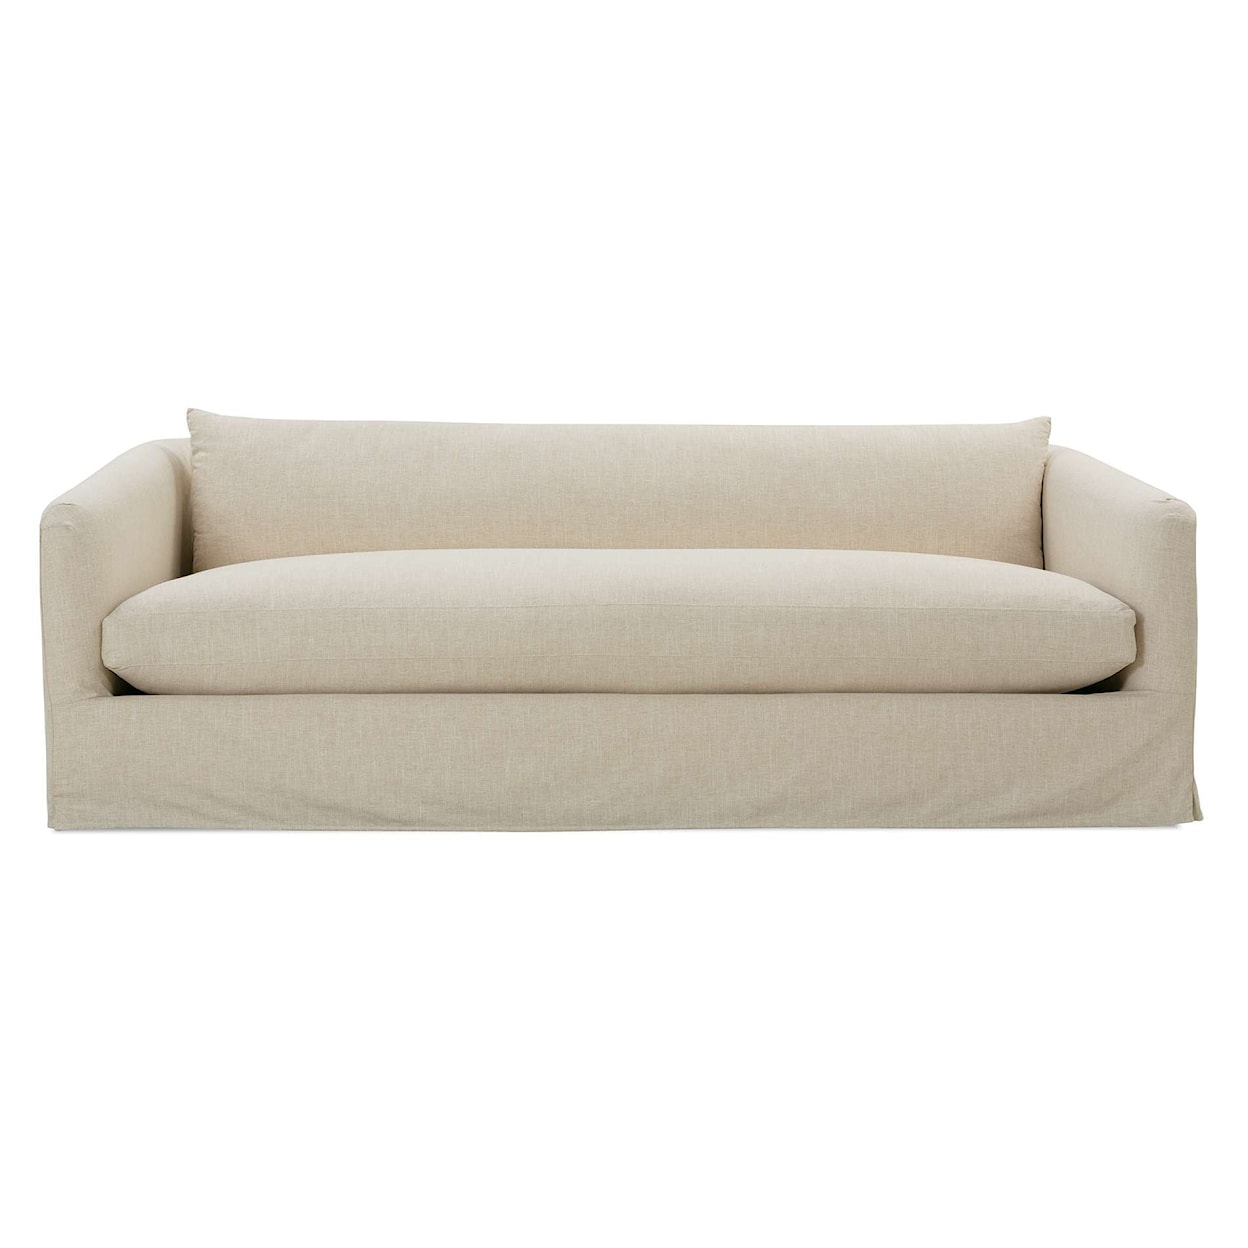 Robin Bruce Florence 86" Sofa with Slipcover